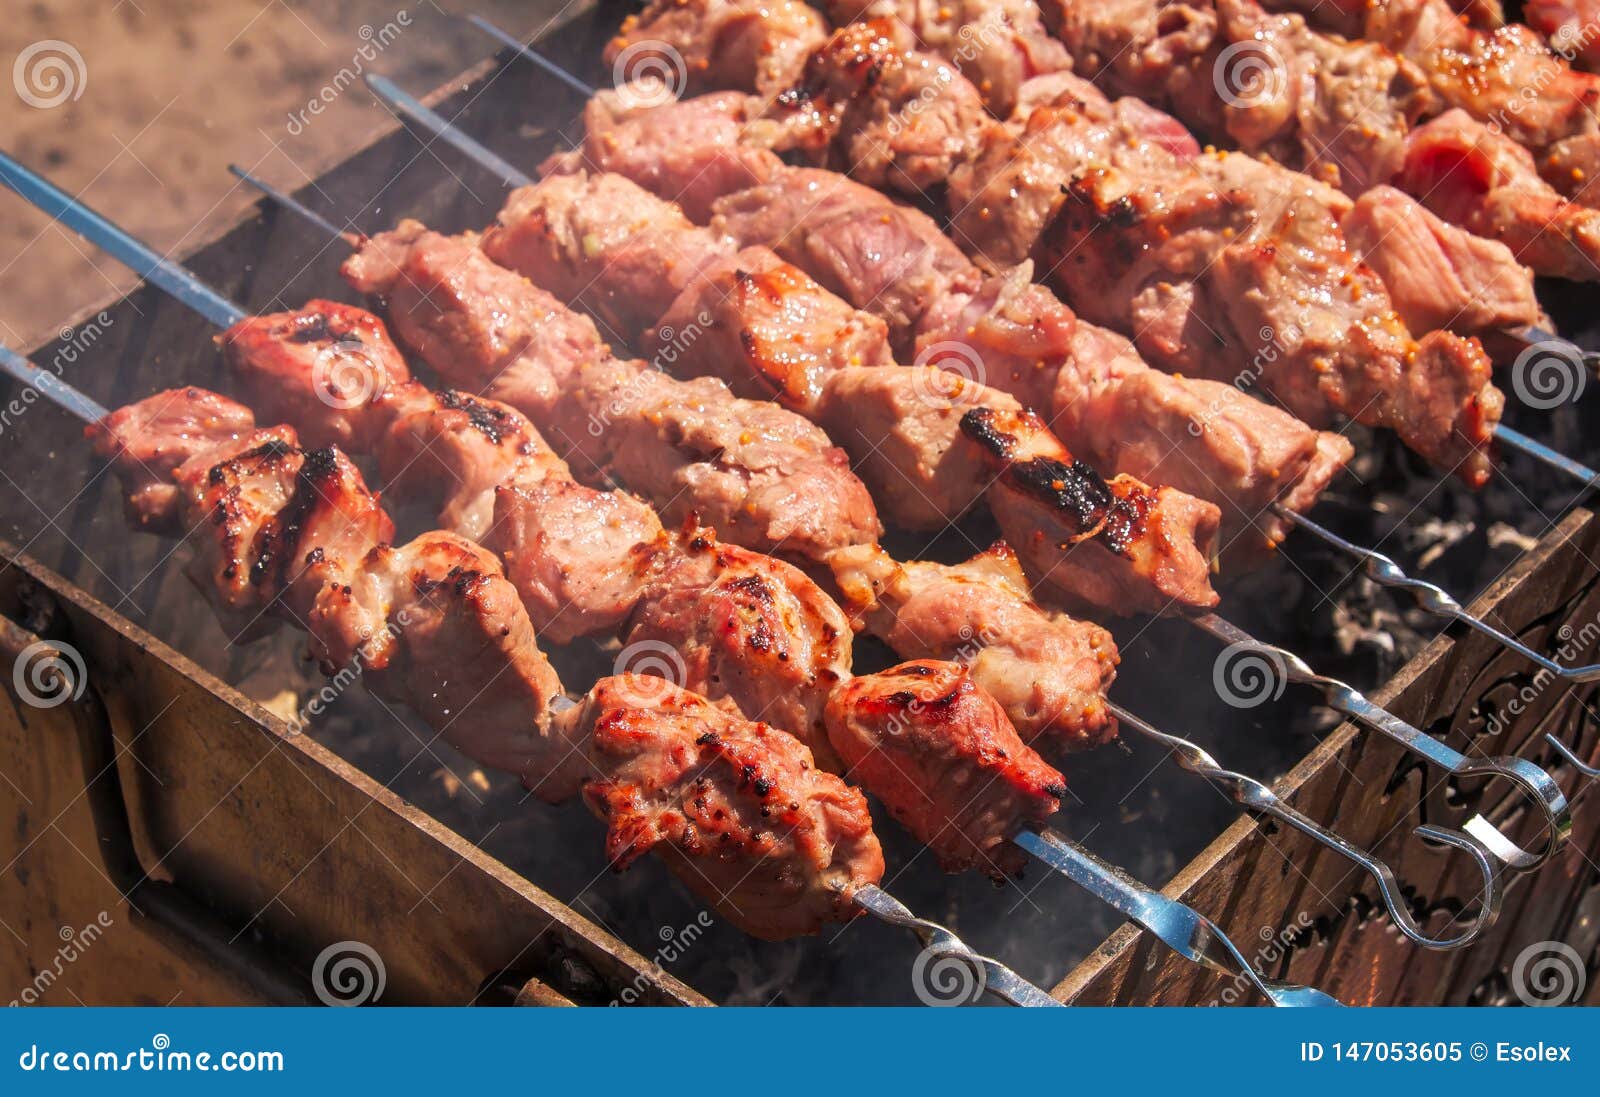 Shish Kebab is Baked Over a Fire with Smoke. Stock Image - Image of ...